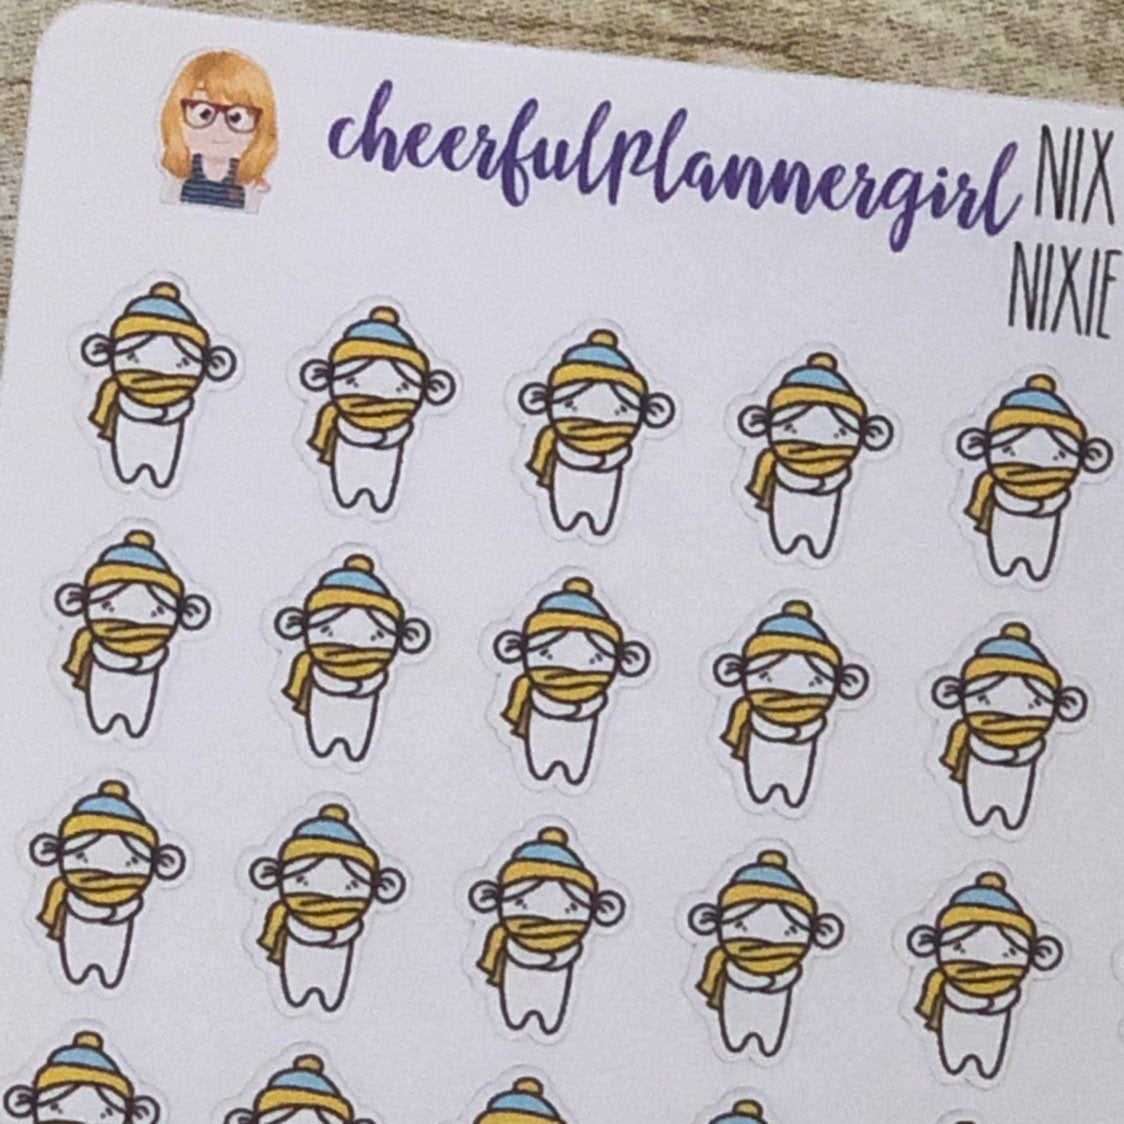 Nixie all Bundled Up Planner Stickers